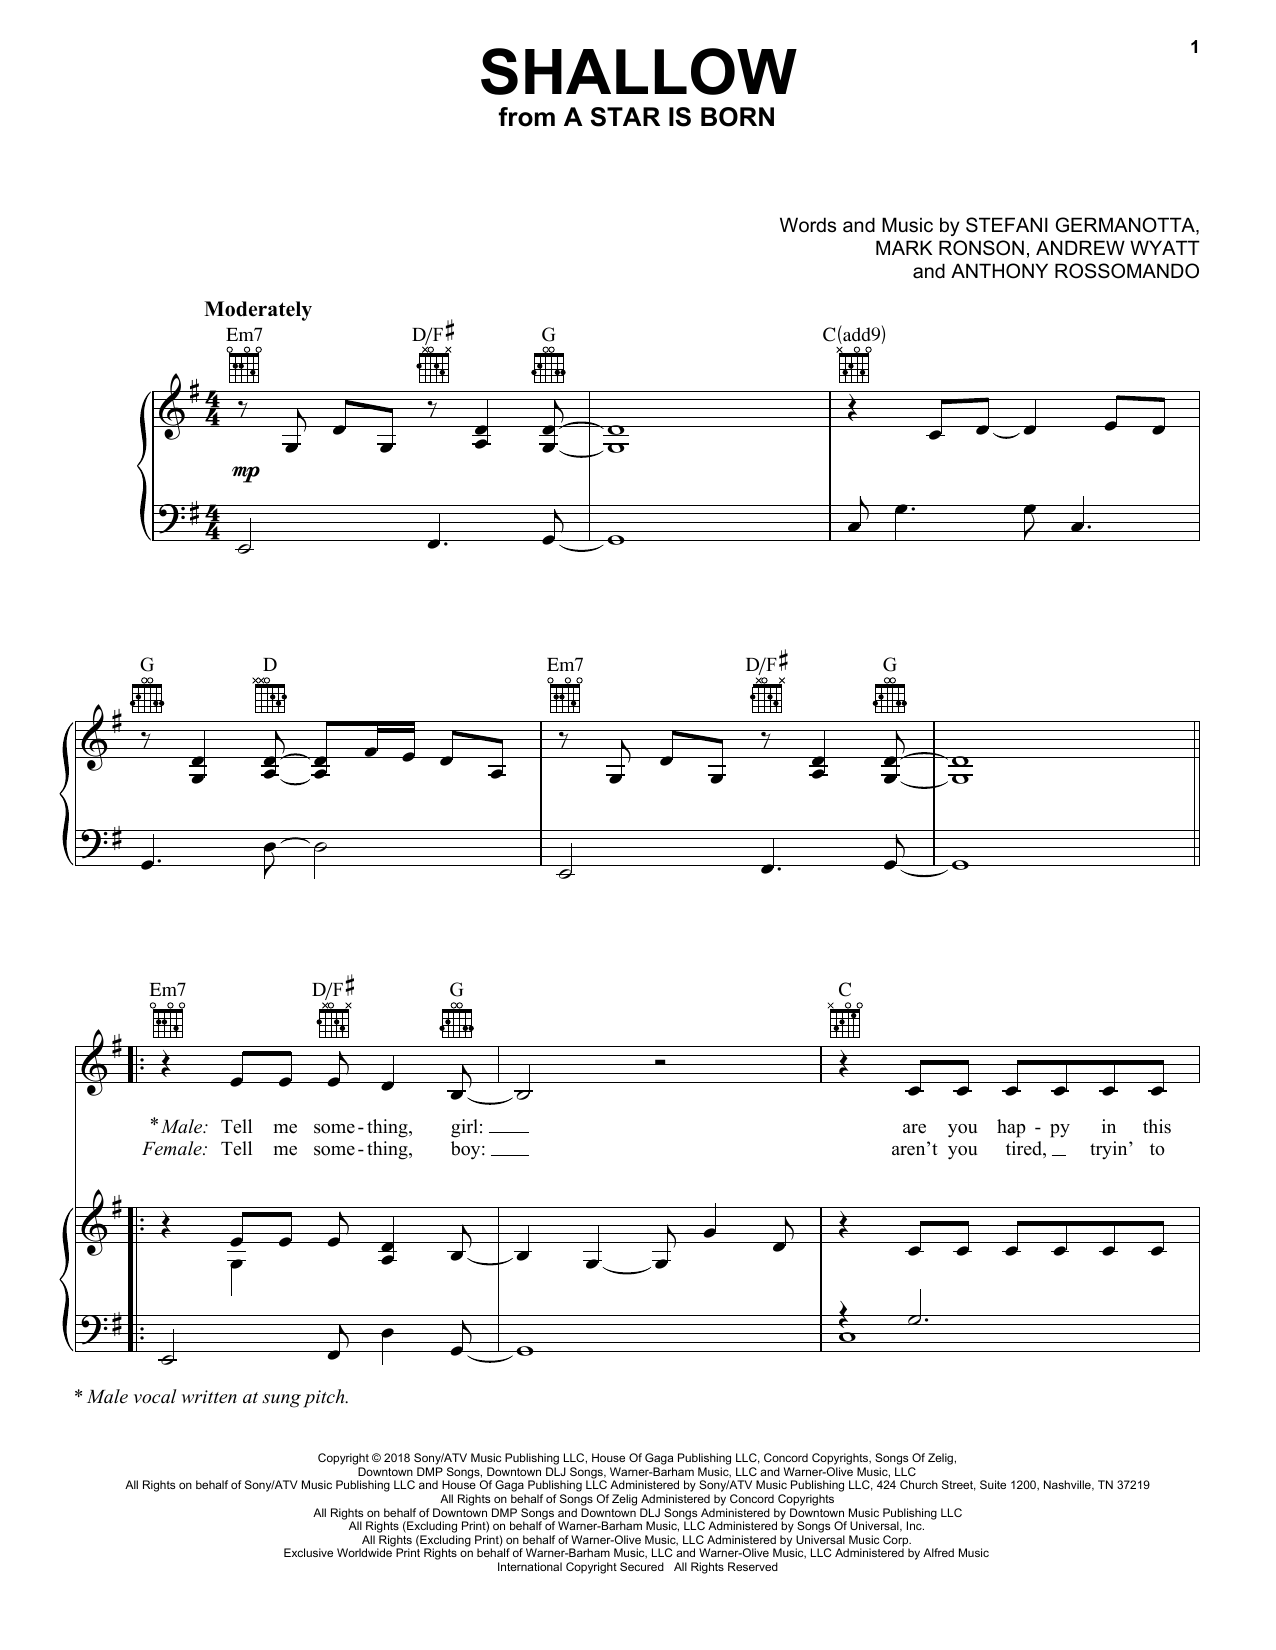 Download Lady Gaga & Bradley Cooper Shallow (from A Star Is Born) Sheet Music